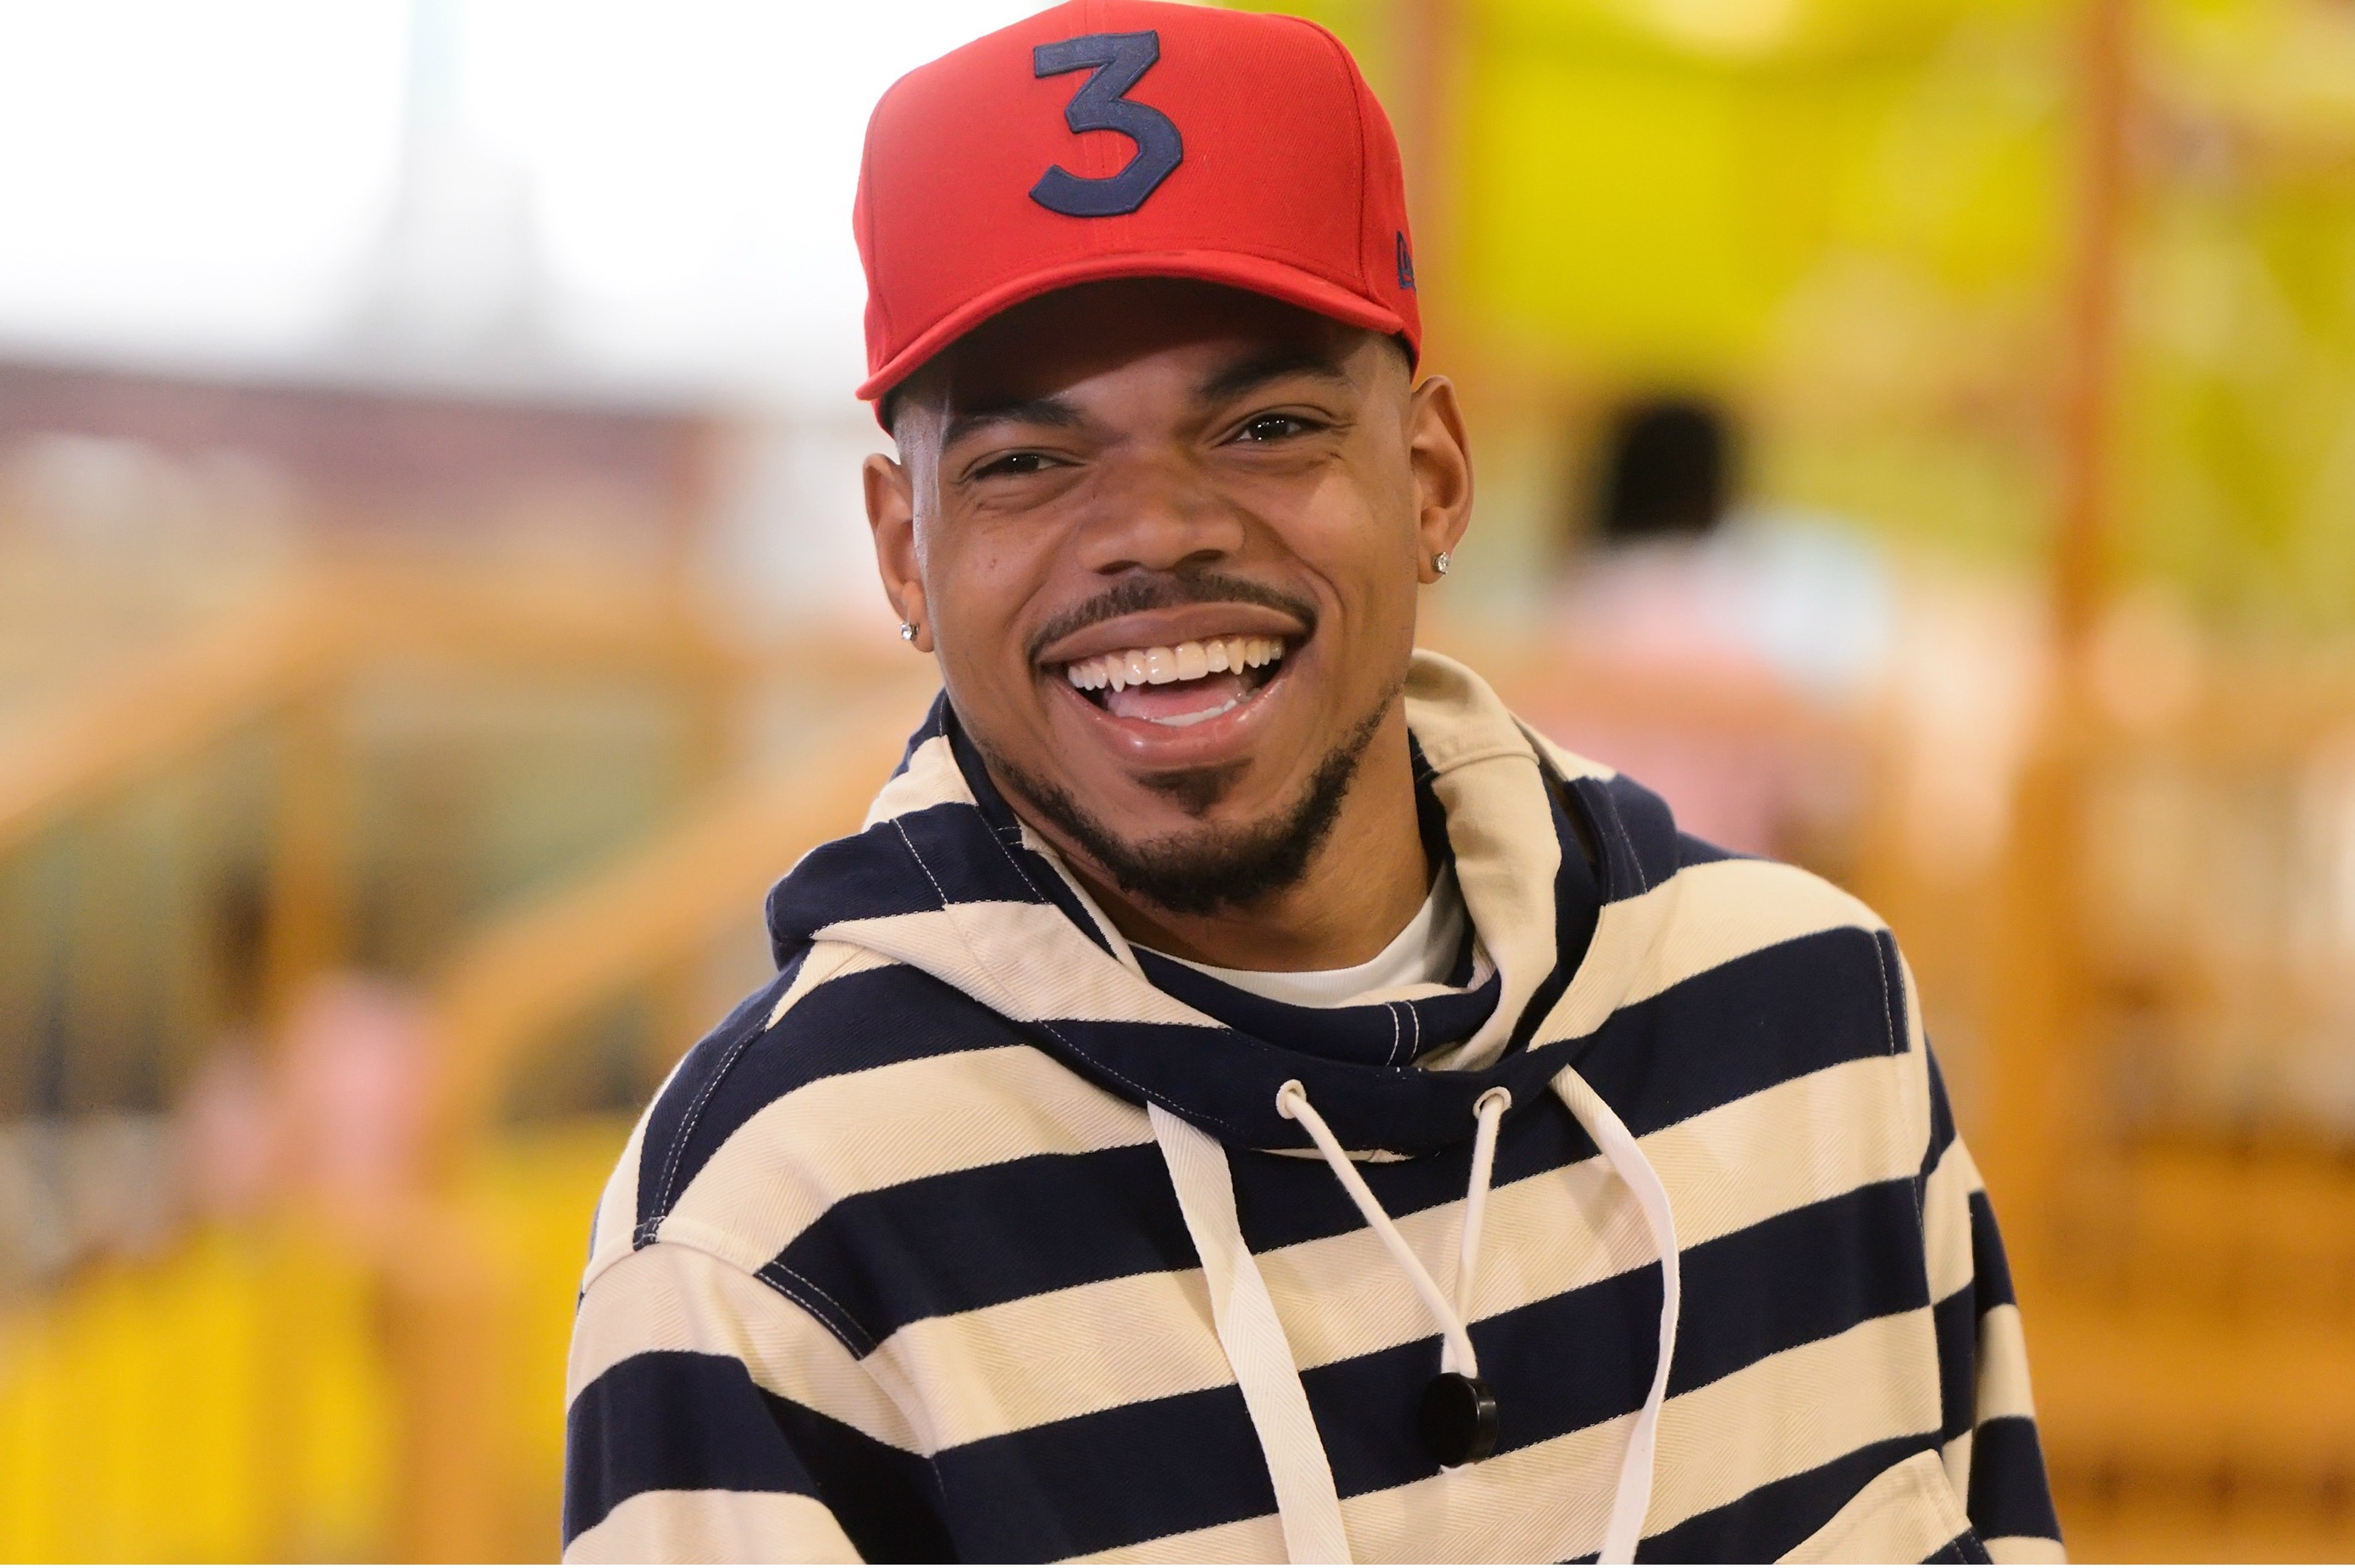 Chance the Rapper Day' Merch Release |